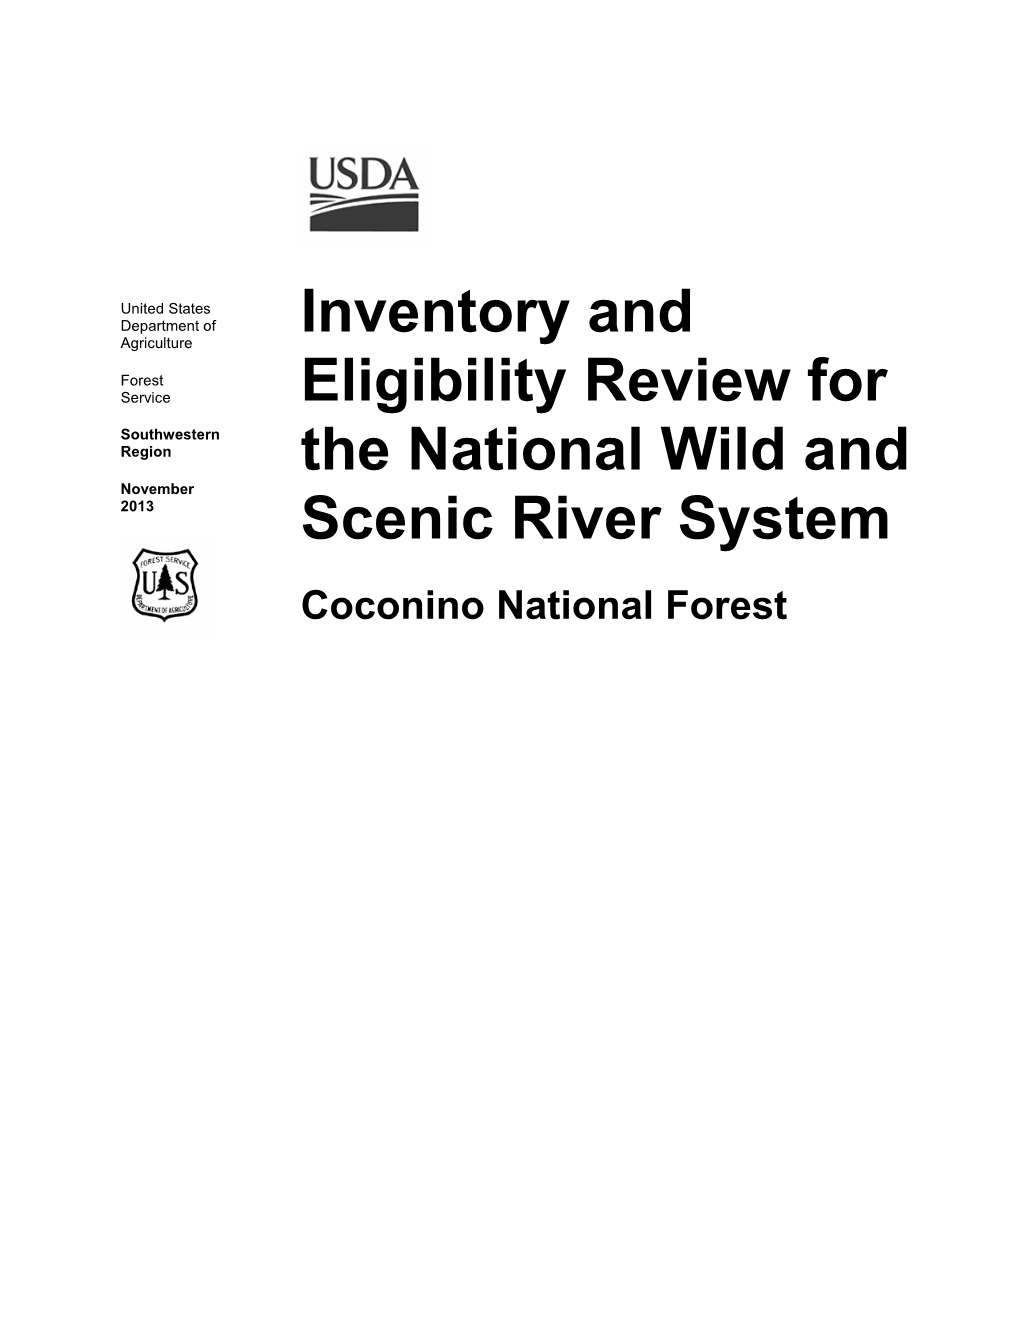 Inventory and Eligibility Report for the Wild and Scenic River System